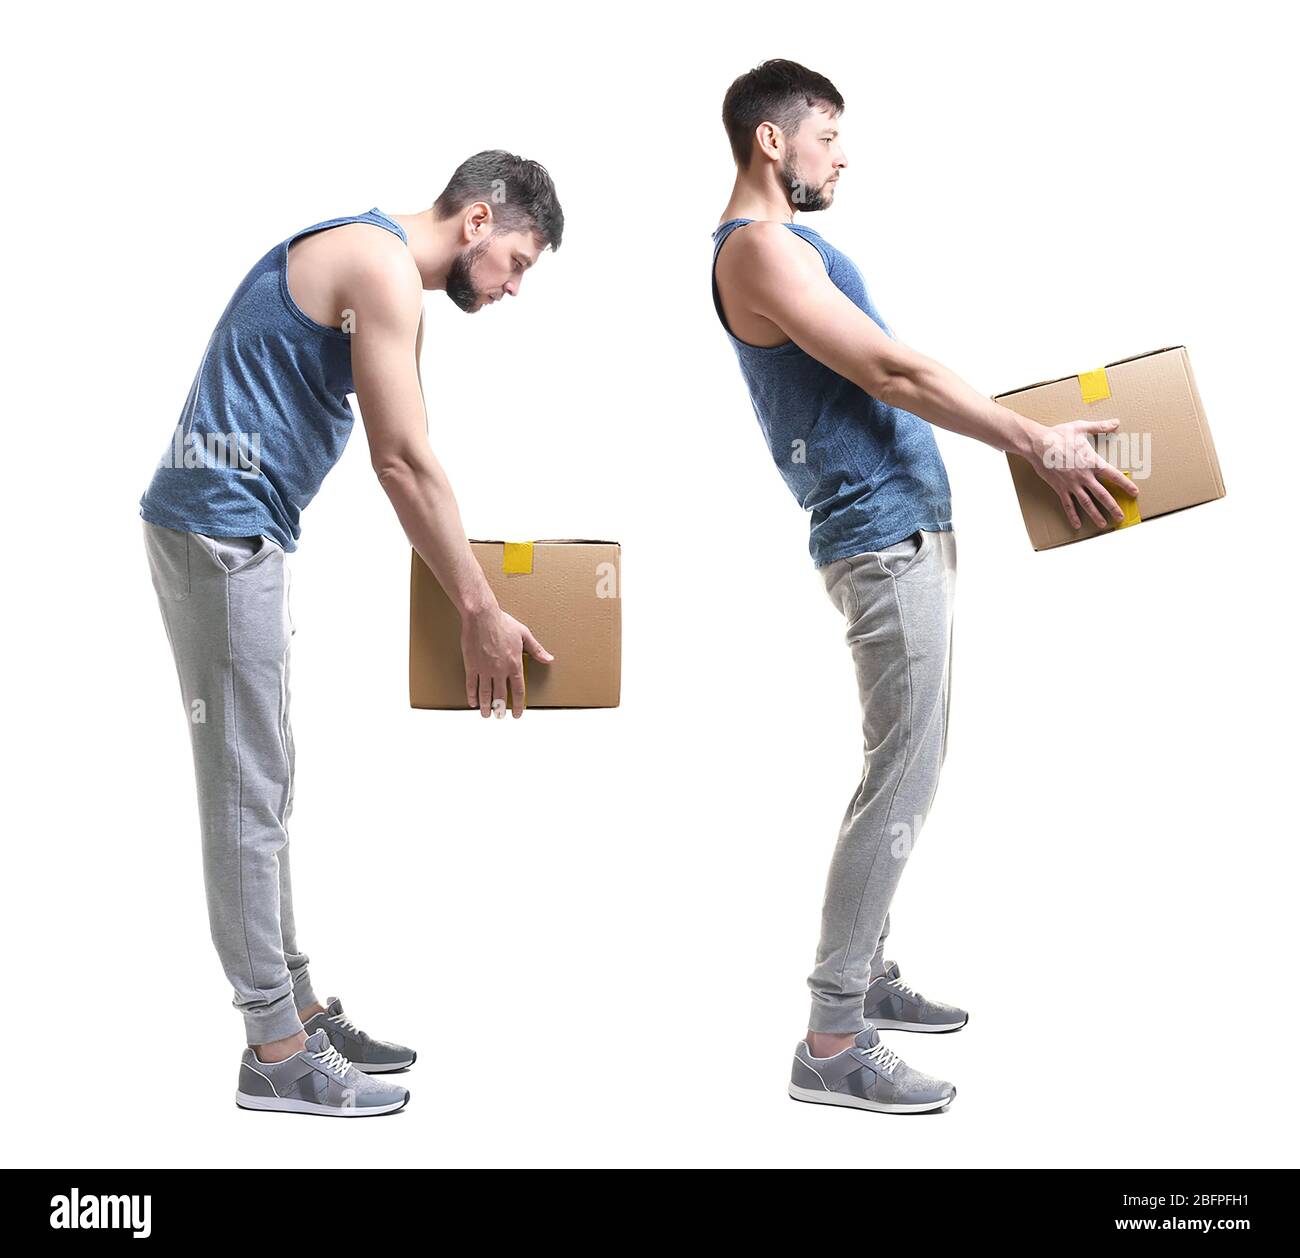 Rehabilitation concept. Collage of man with poor posture lifting heavy cardboard box on white background Stock Photo